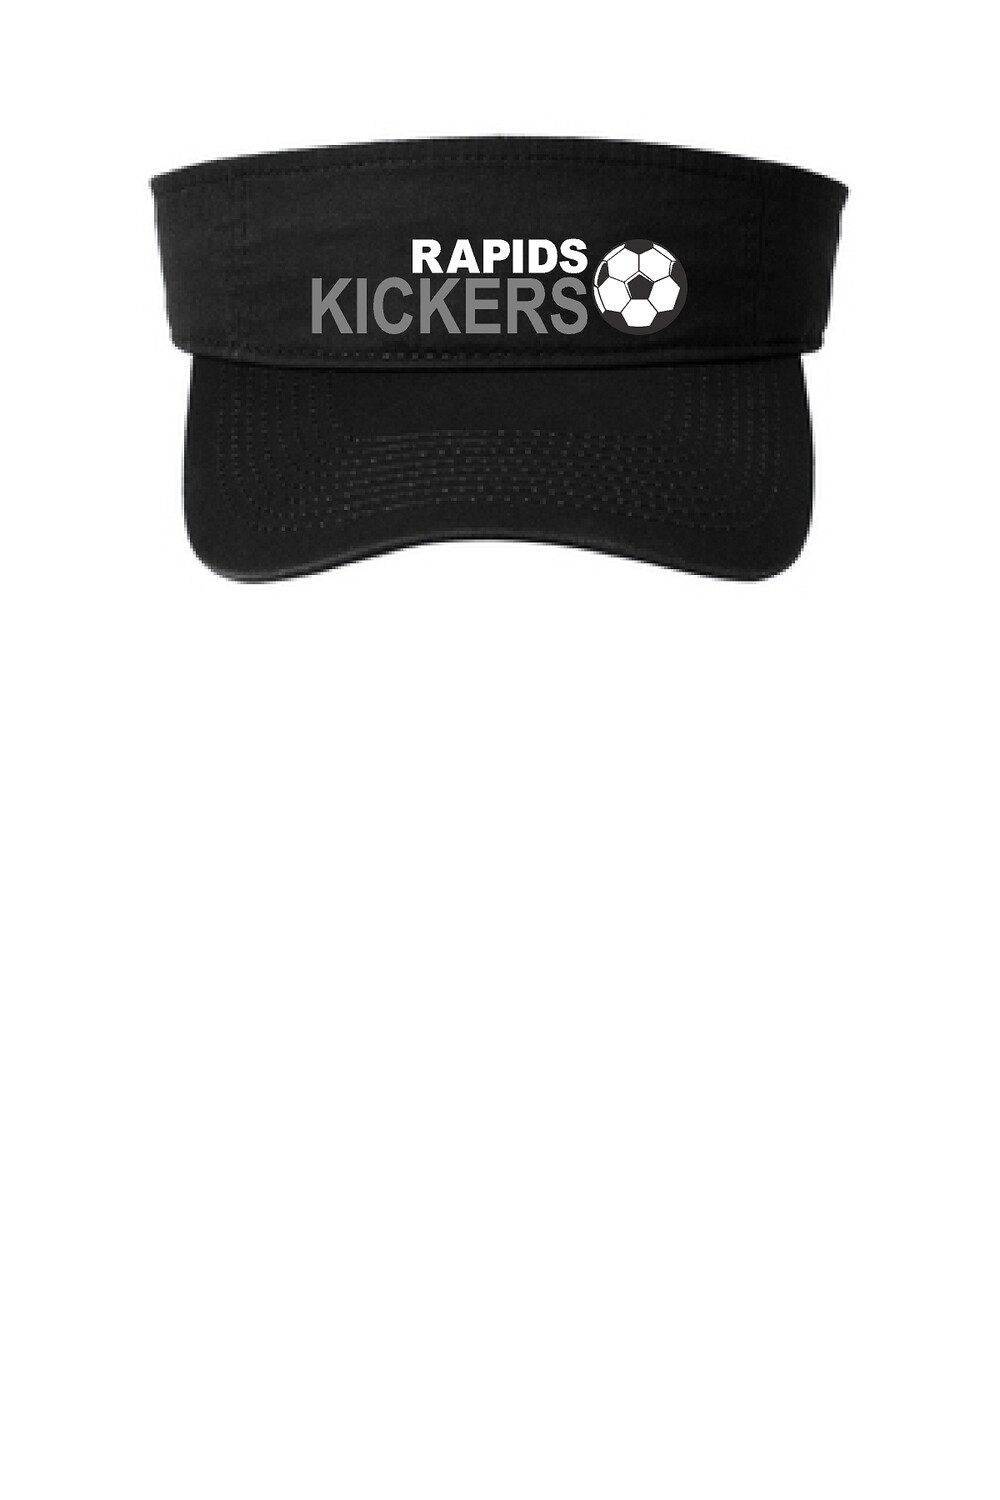 Port &amp; Company® - Visor - Black -WITH EMBROIDERED LOGO - Kickers Soccer